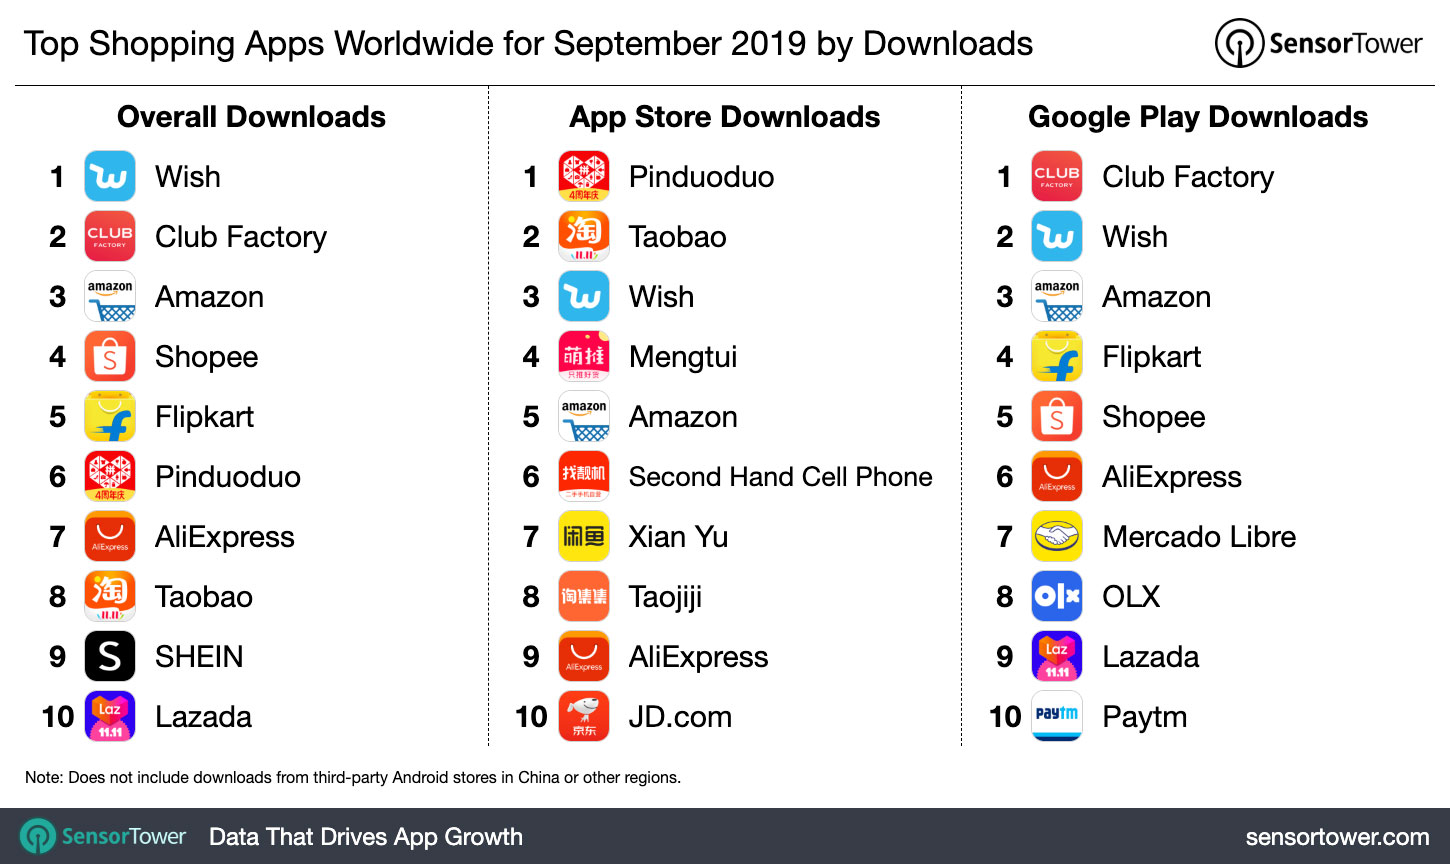 Top Shopping Apps Worldwide for September 2019 by Downloads